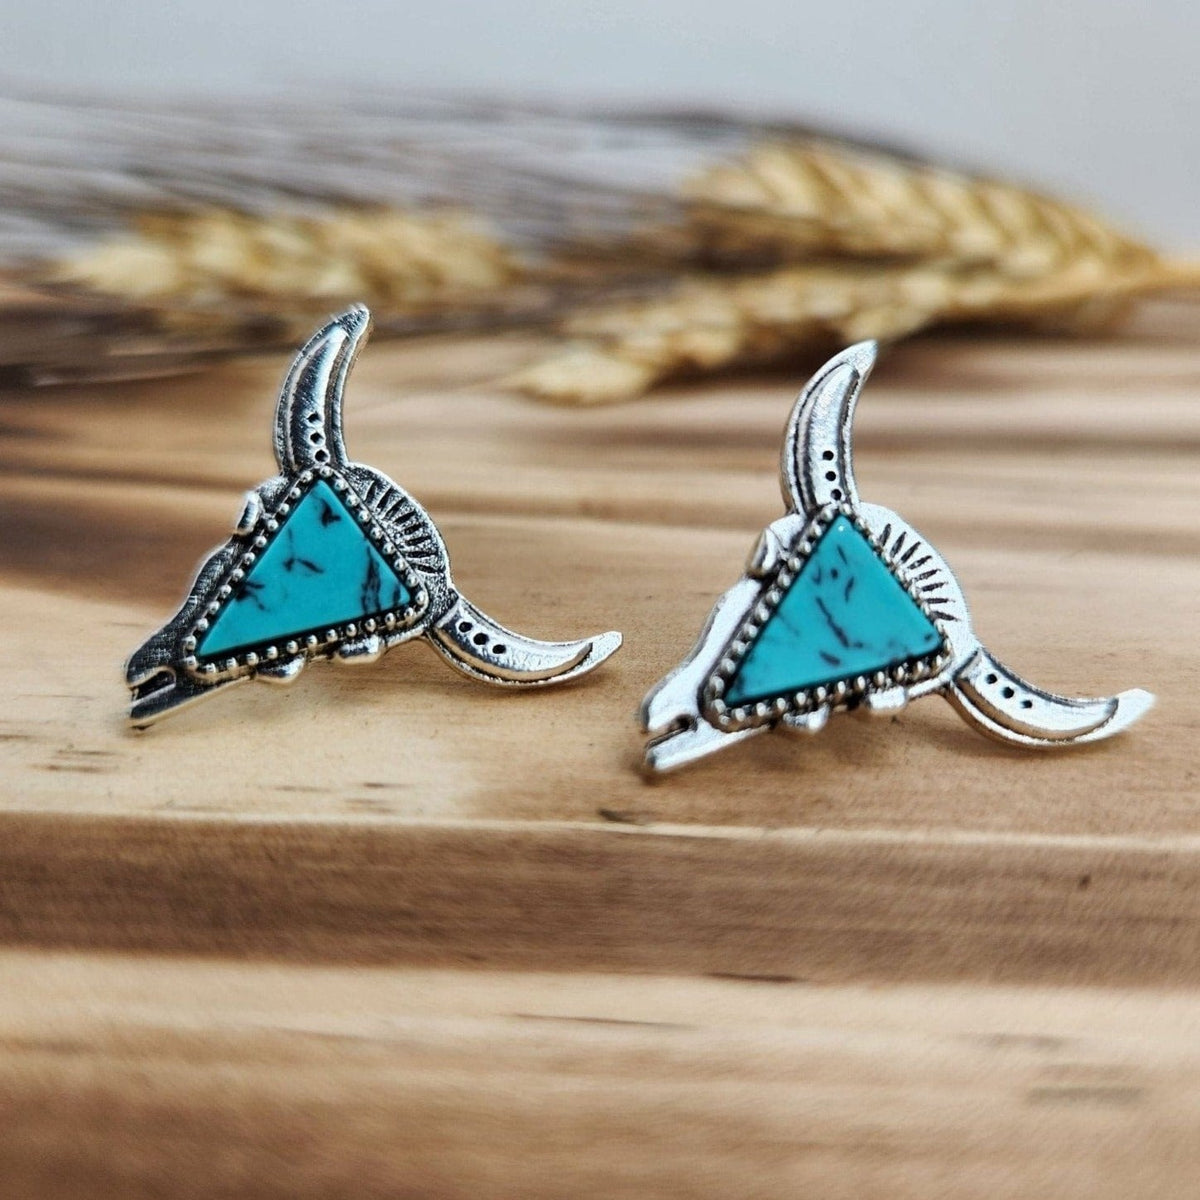 Texas Longhorn Silver and Turquoise Earrings Earrings TheFringeCultureCollective